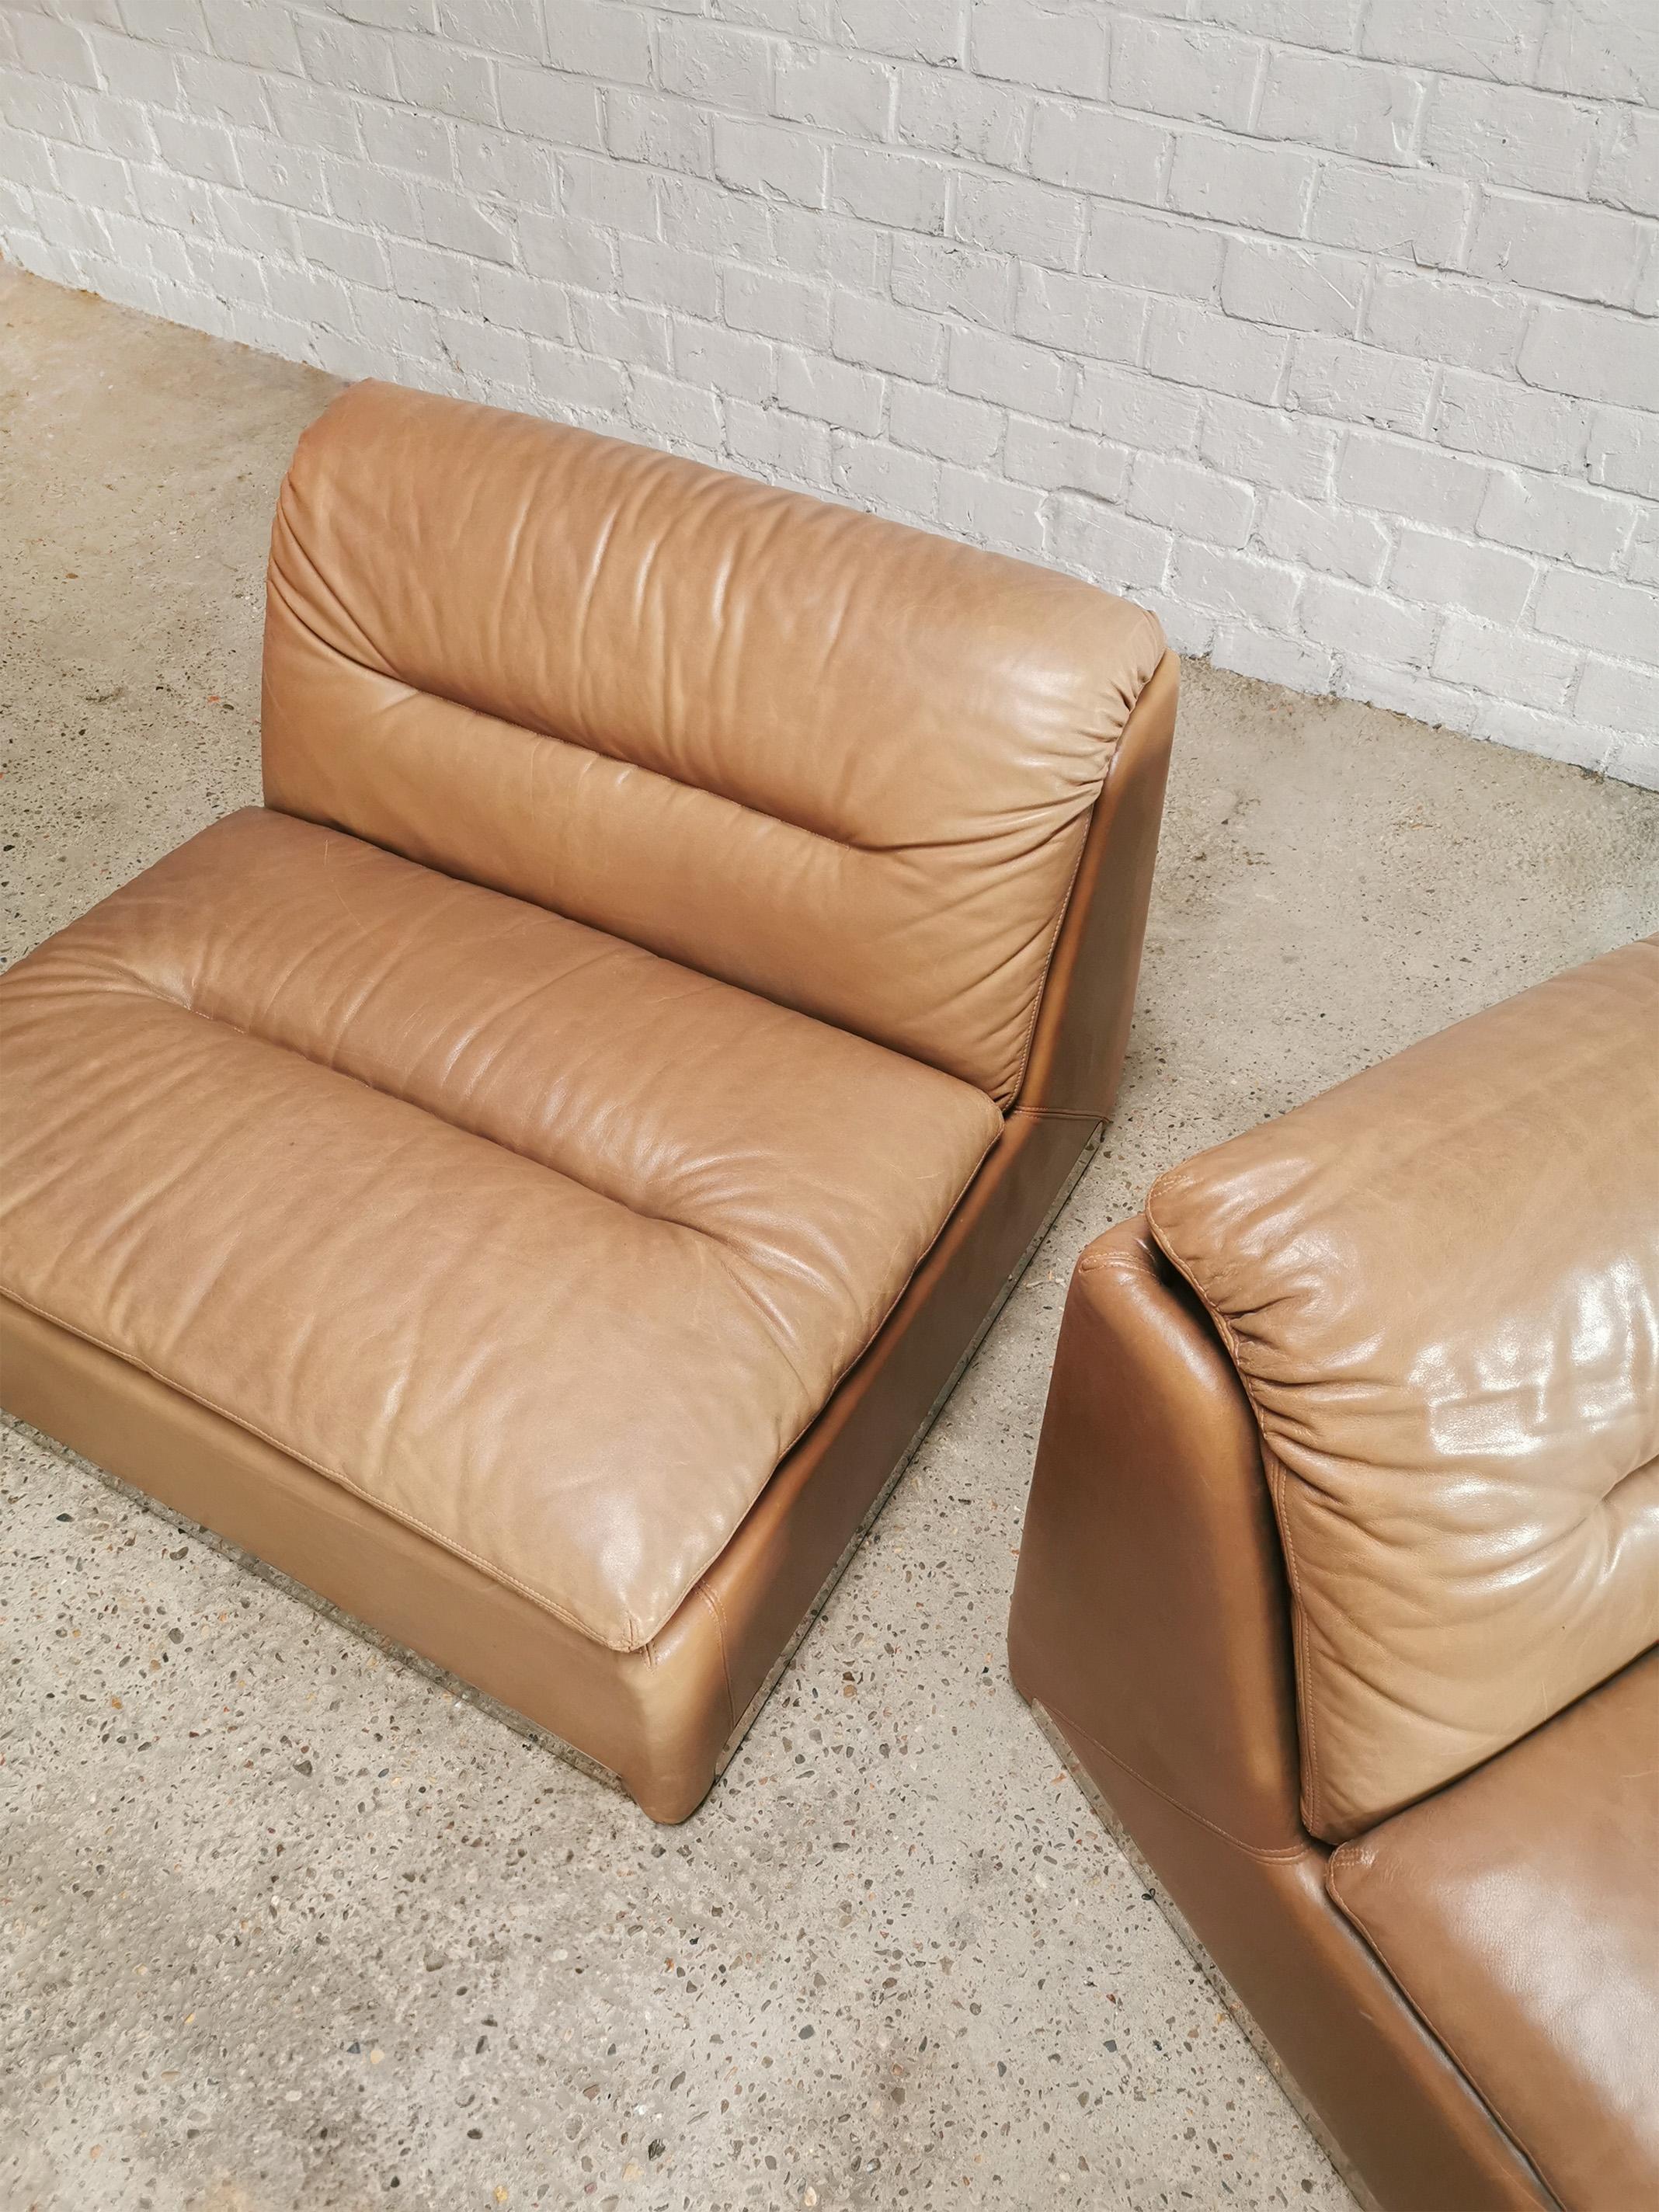 Stainless Steel Saporiti Cognac Leather 'P10' Lounge Chairs, Italy 1970's For Sale